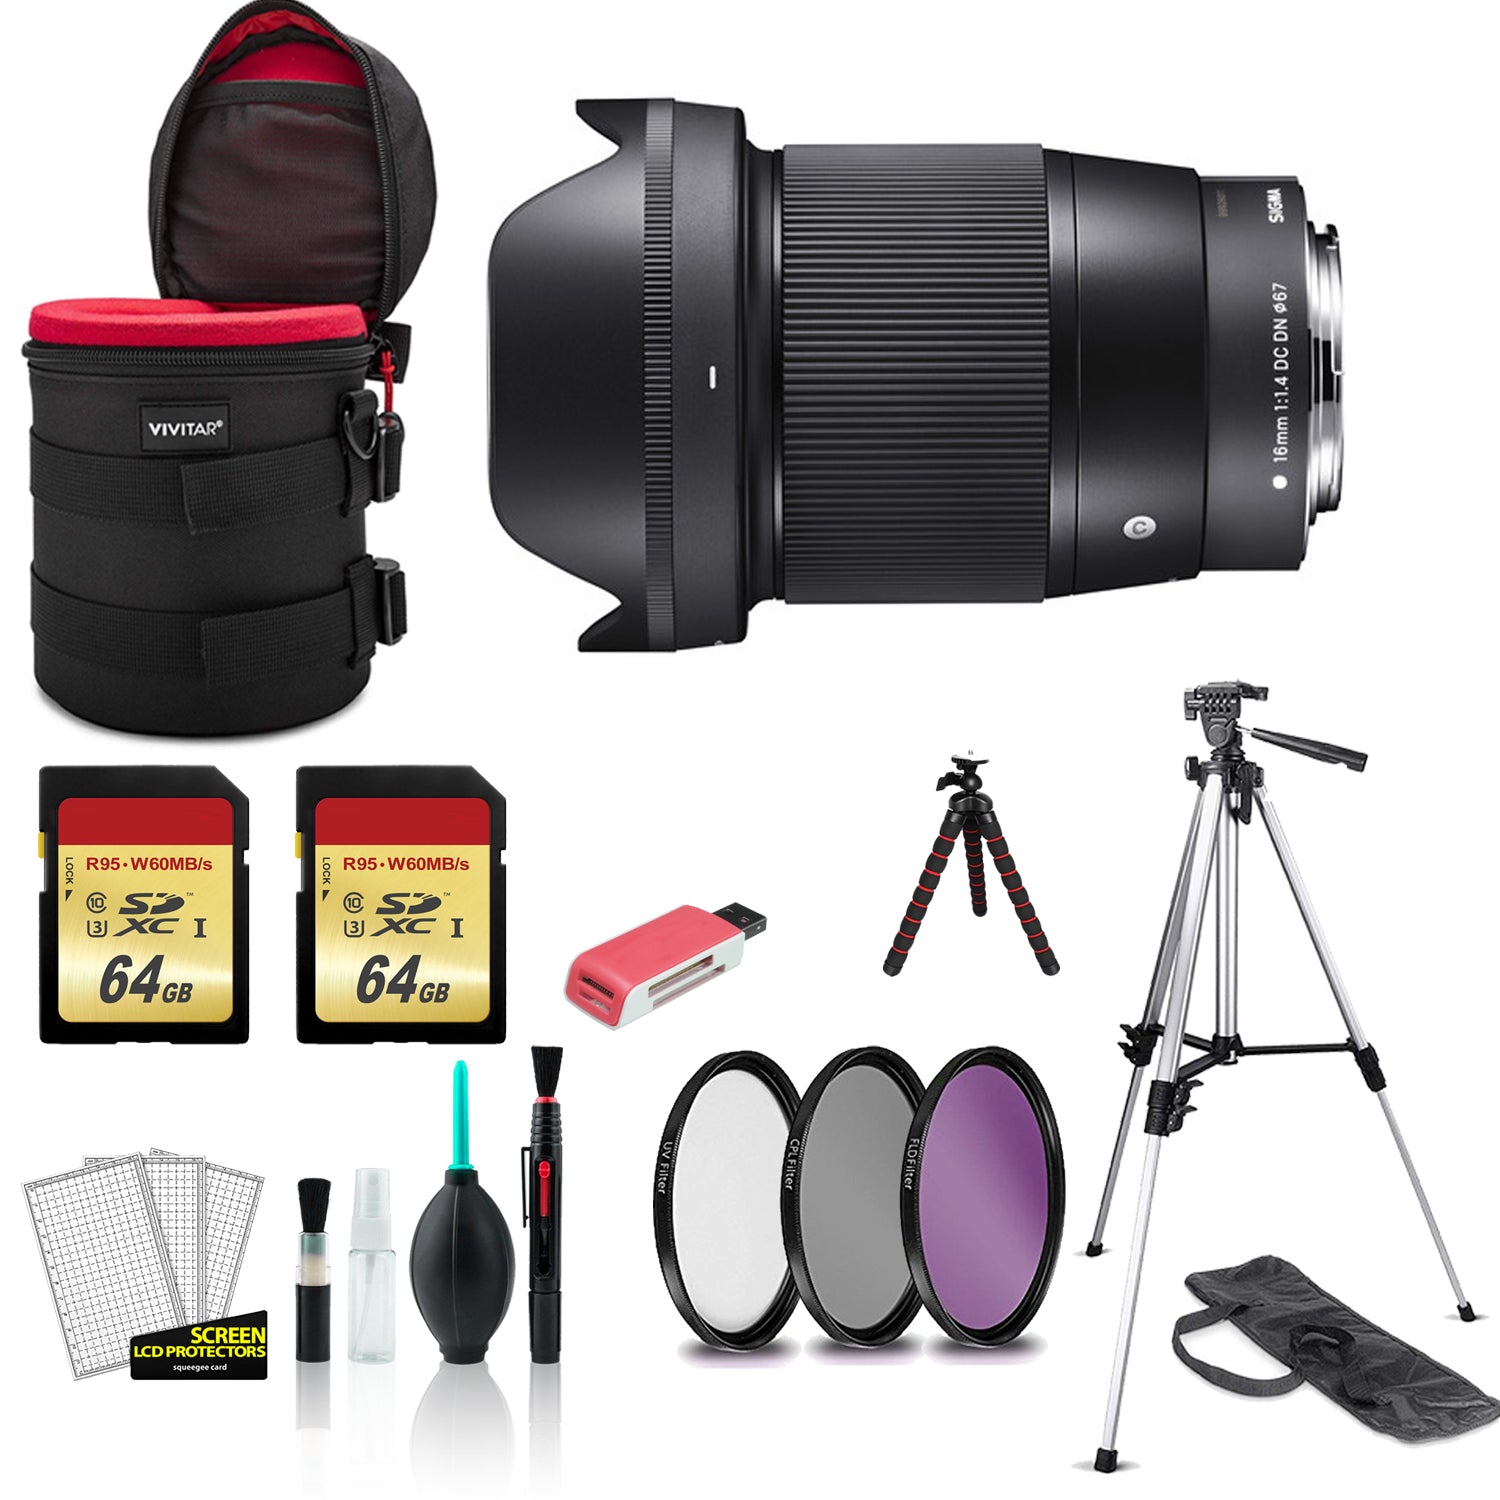 Sigma 16mm Contemporary Lens f/1.4 DC DN for Micro Four Thirds 402963 with 2x 64GB Memory Card + Tripod Bundle